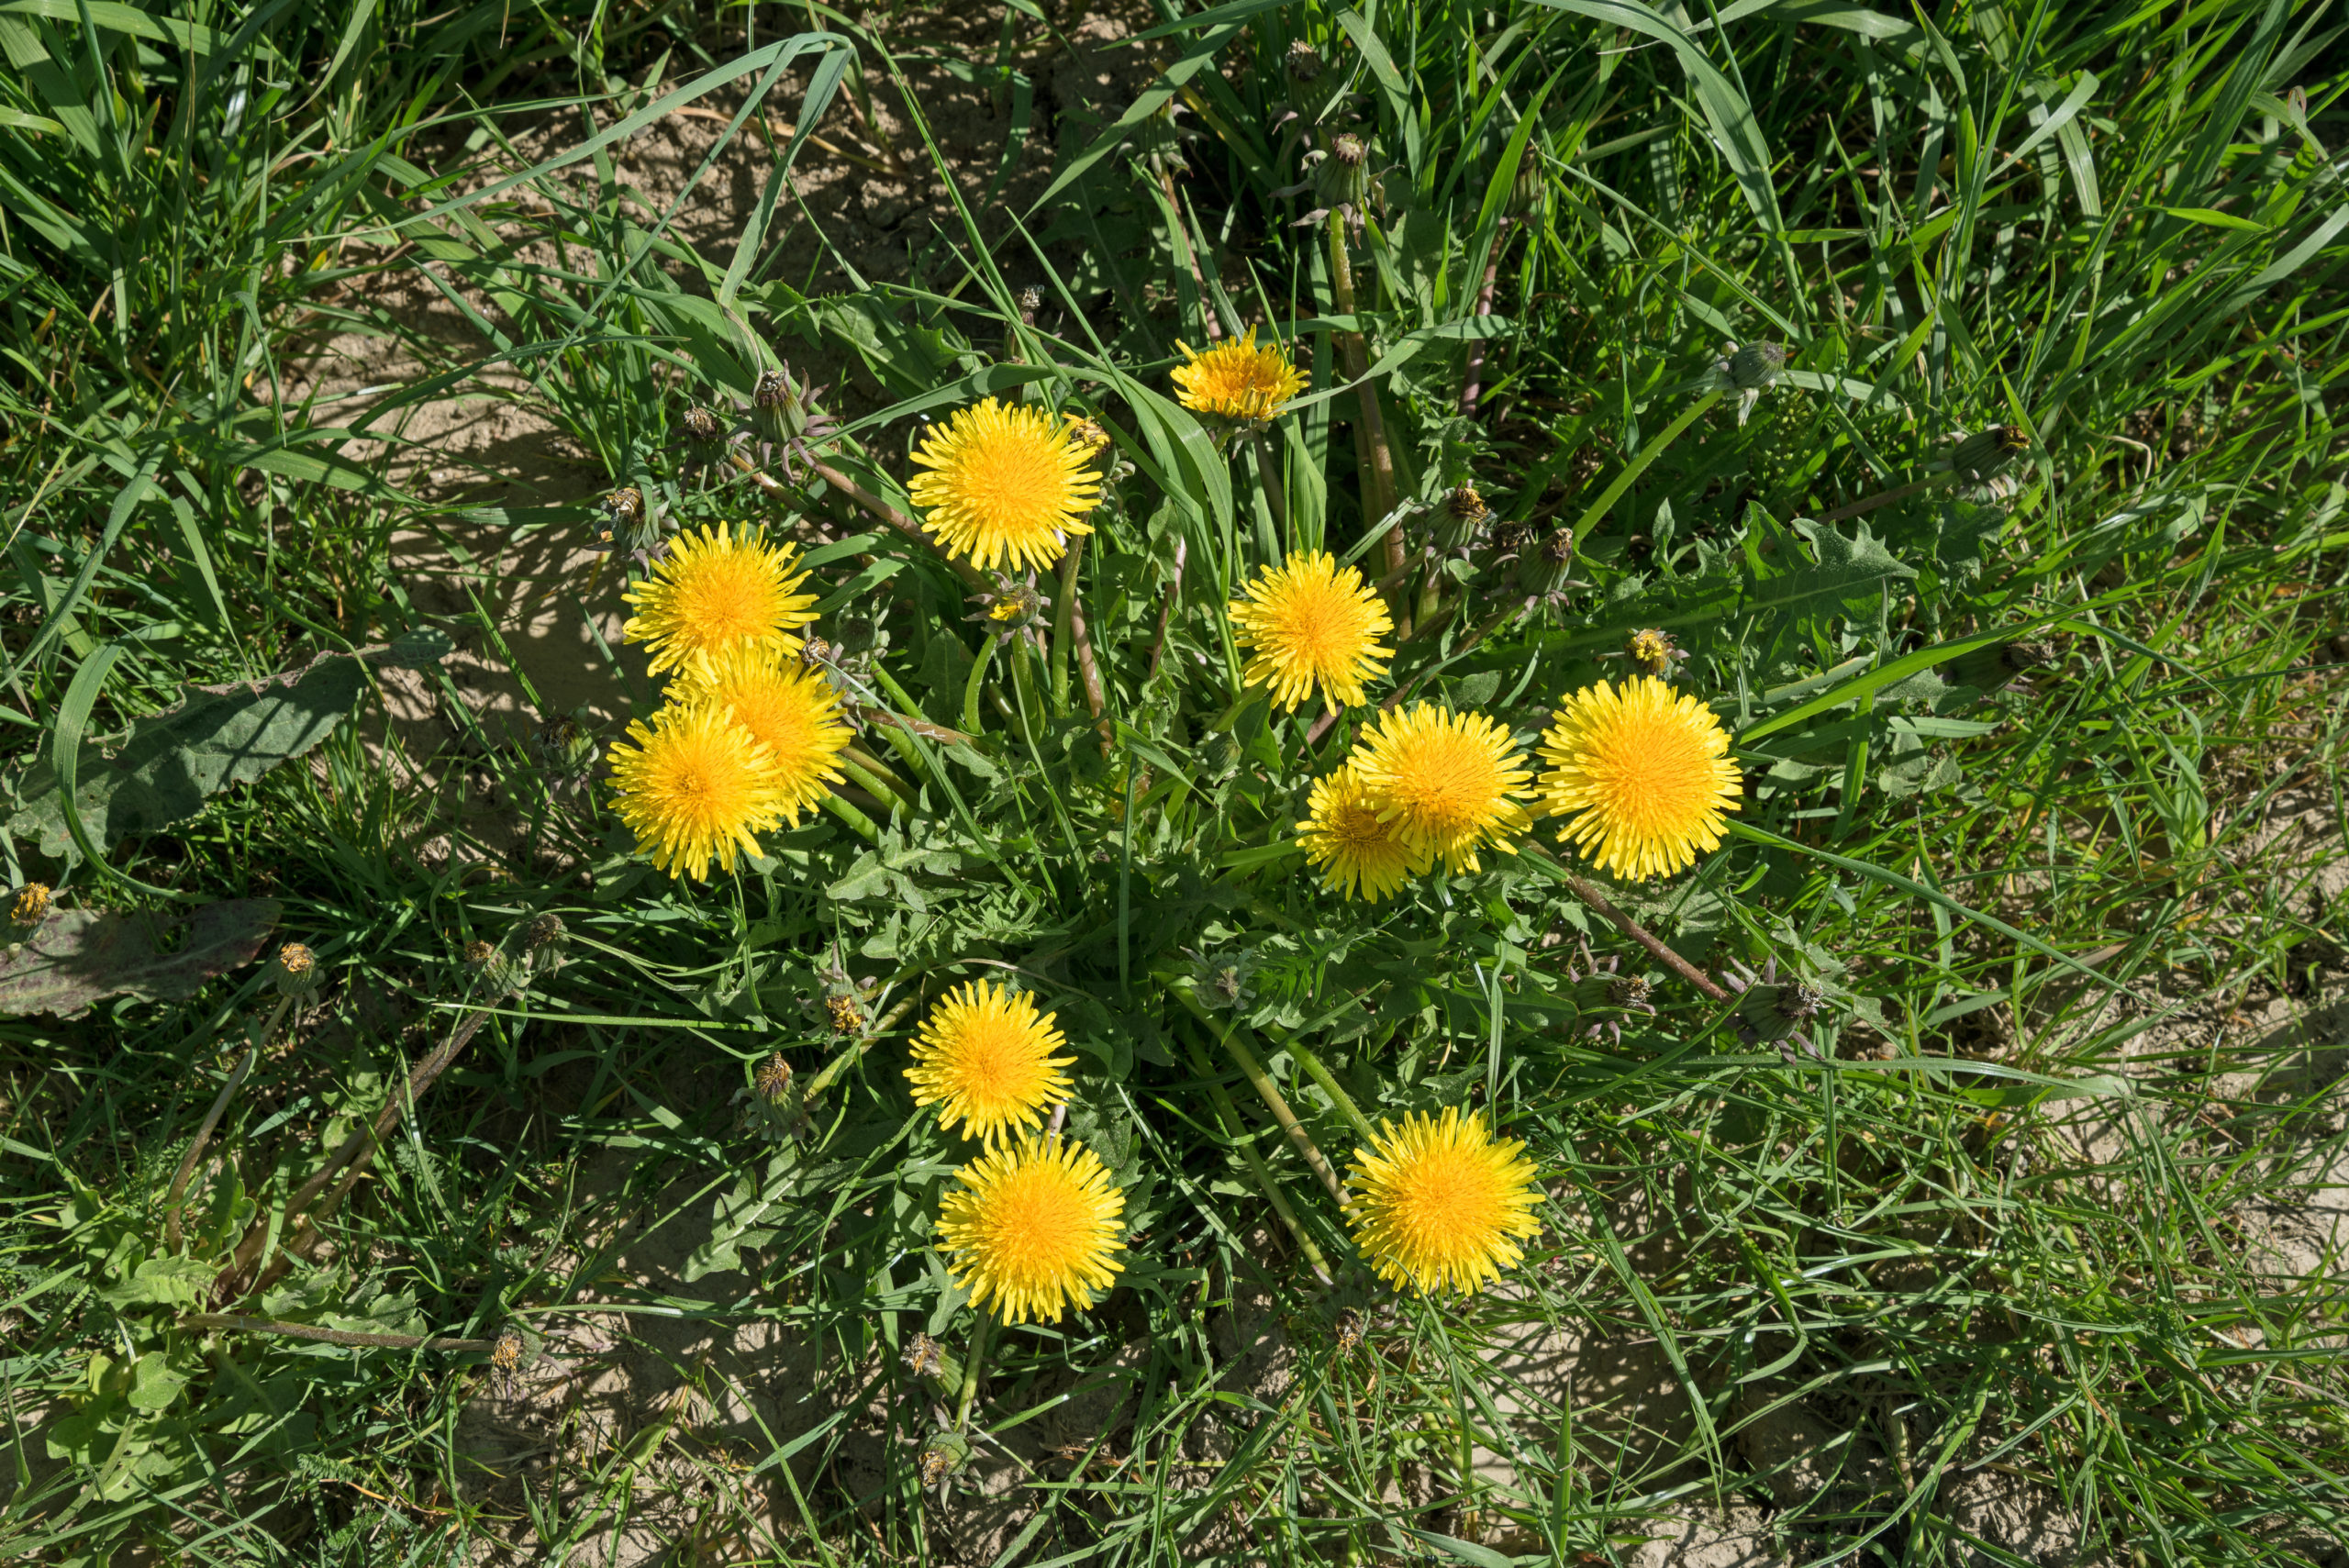 Grass - Weed